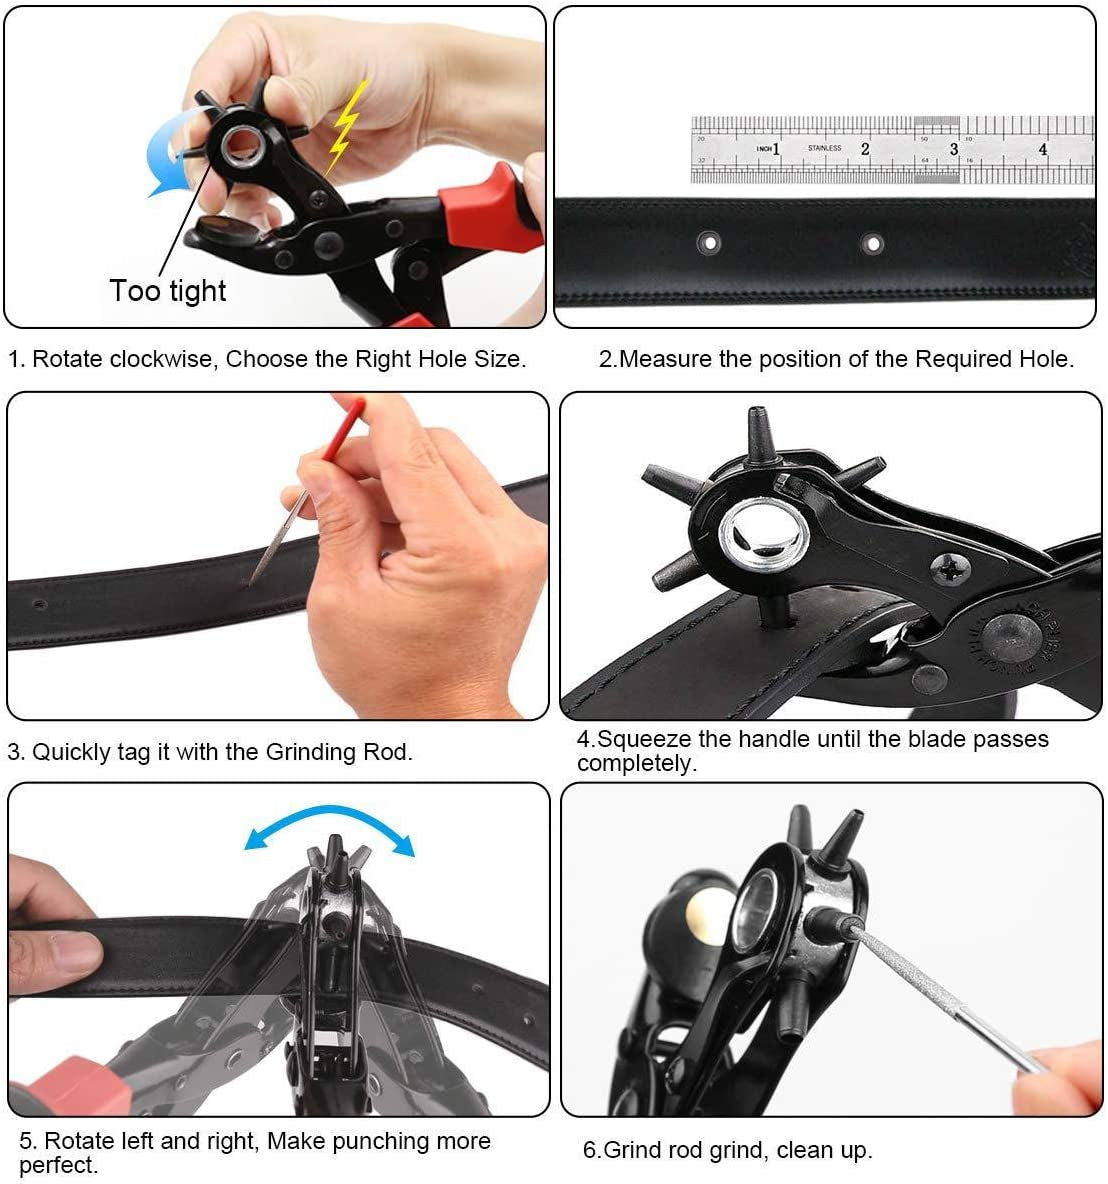 FYJIDY, Leather Hole Punch Set, Revolving Punch Plier Kit,Multi Hole Sizes Maker Tool,Super Heavy Duty Rotary Puncher for Belts, Dog Collars, Saddles, Shoes, Fabric,Watch Bands, Straps